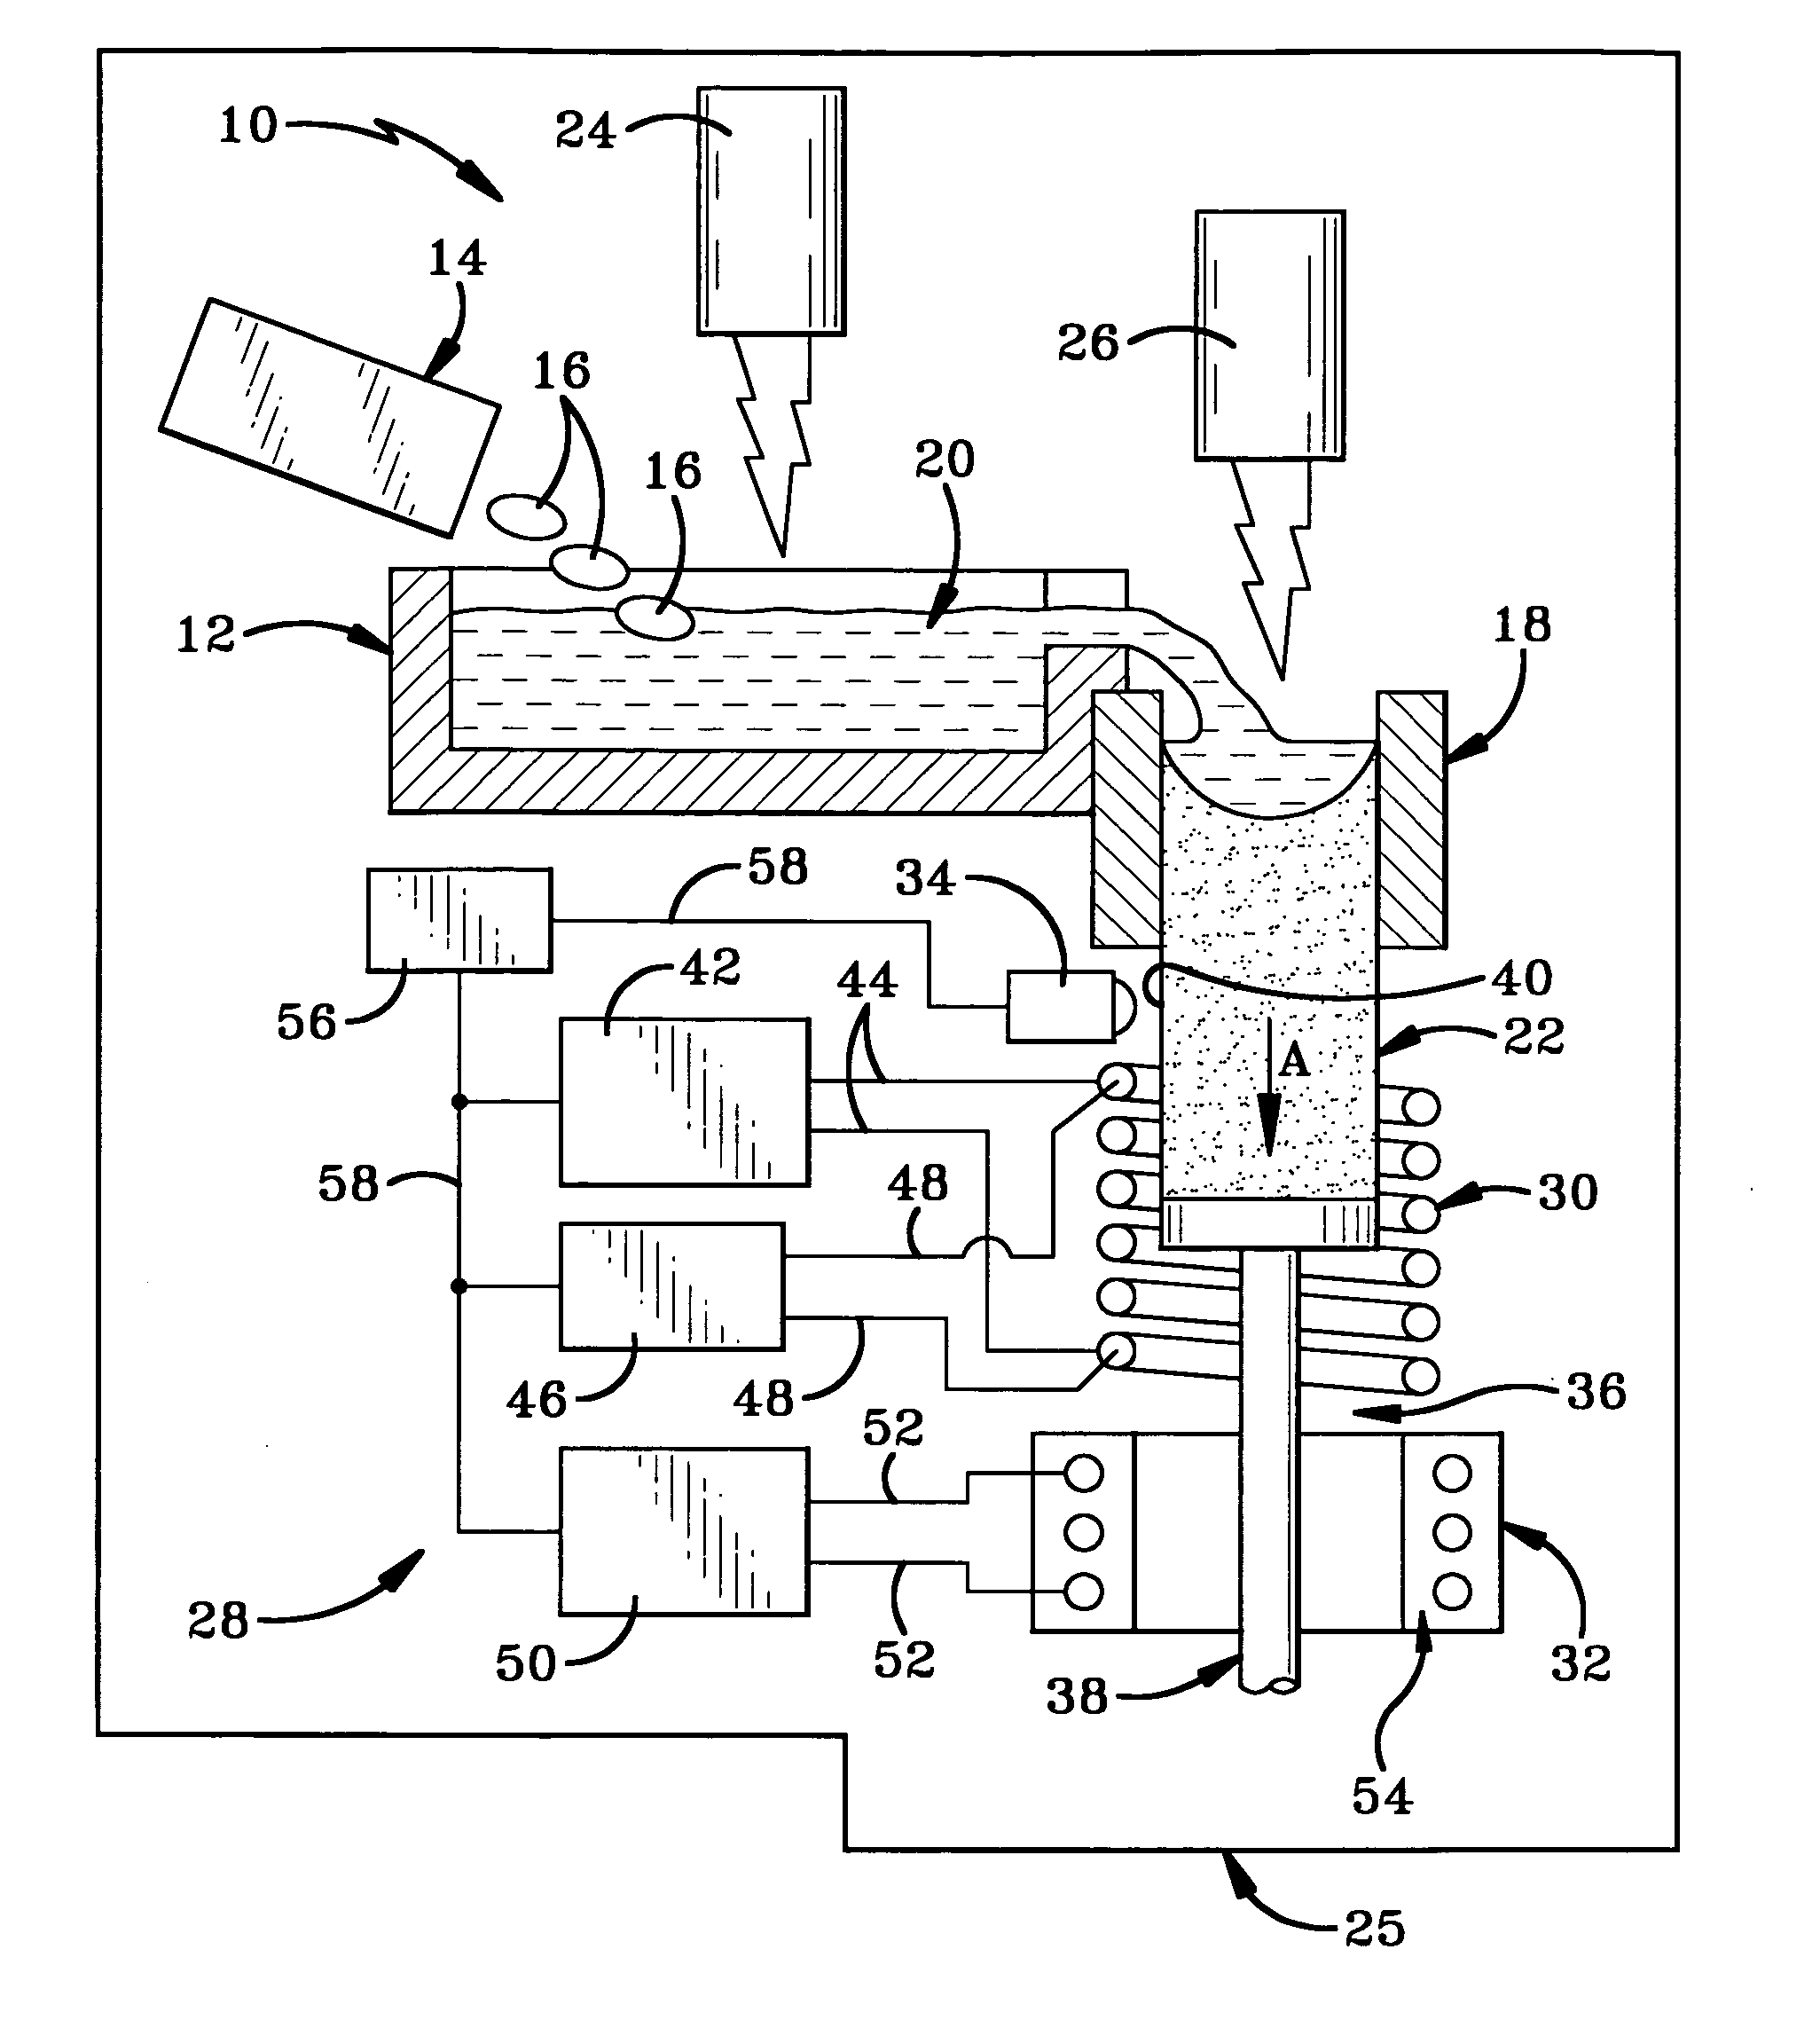 Method and apparatus for temperature control in a continuous casting furnace